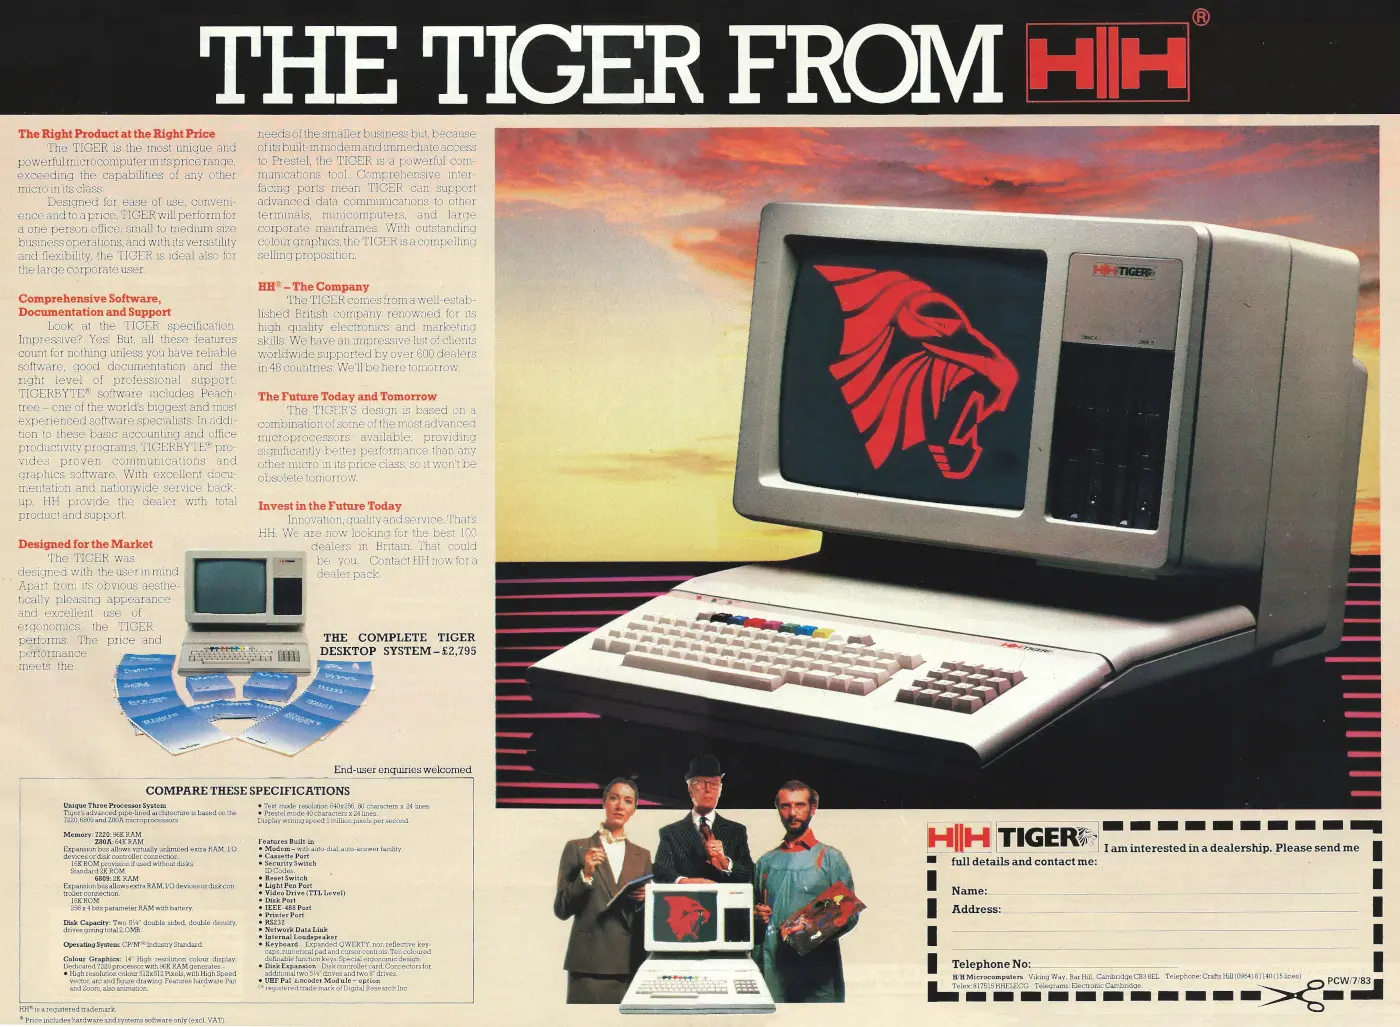 HH Advert: The Tiger from HH, from Personal Computer World, July 1983